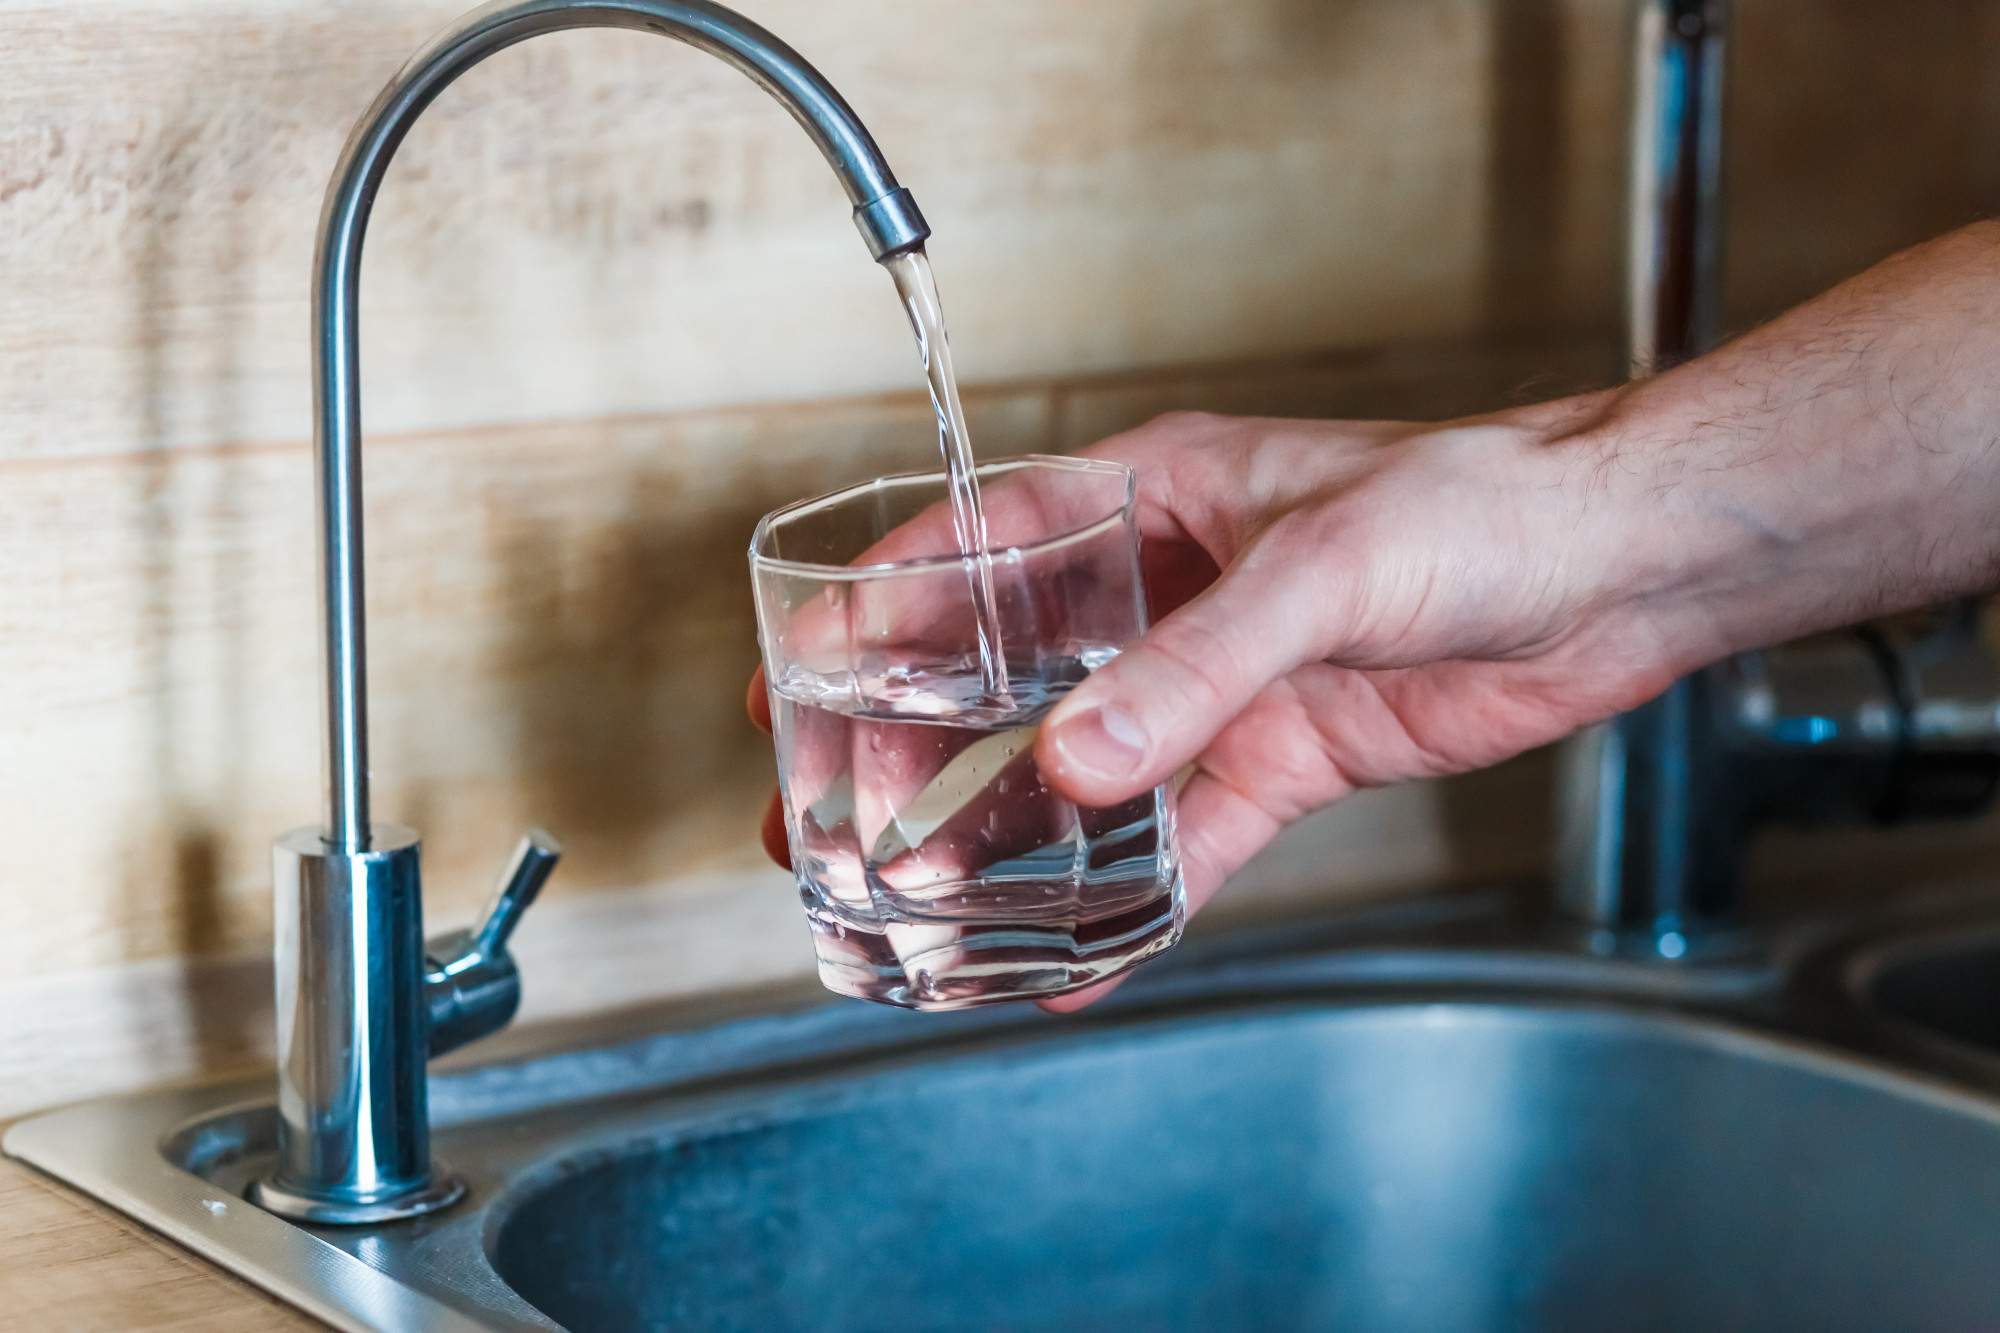 Water Softener vs. Filter: What Are the Differences?